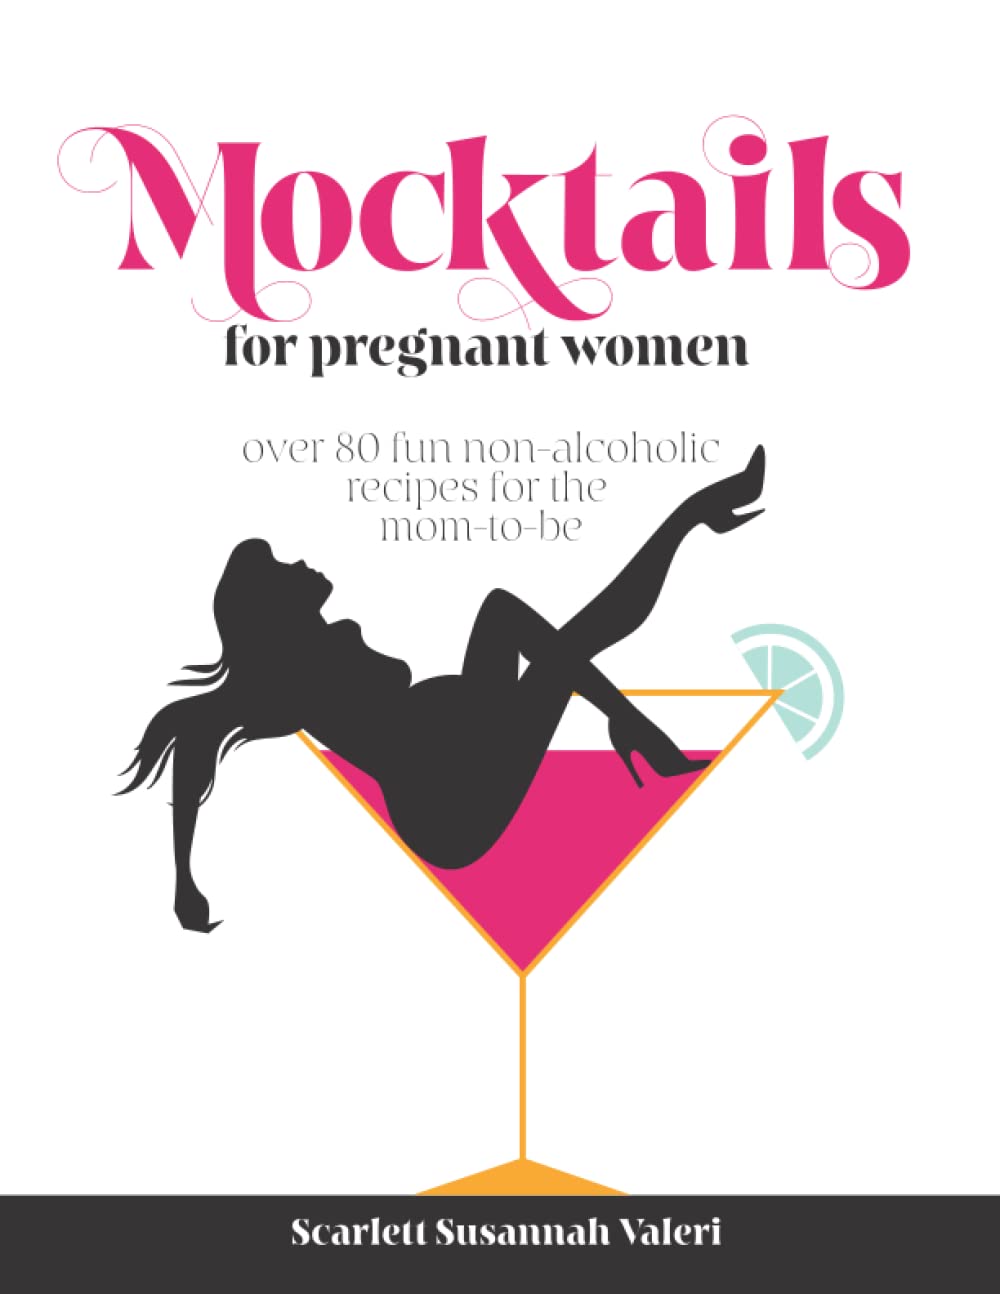 Mocktails For Pregnant Women: Over 80 fun non-alcoholic recipes for the mom-to-be